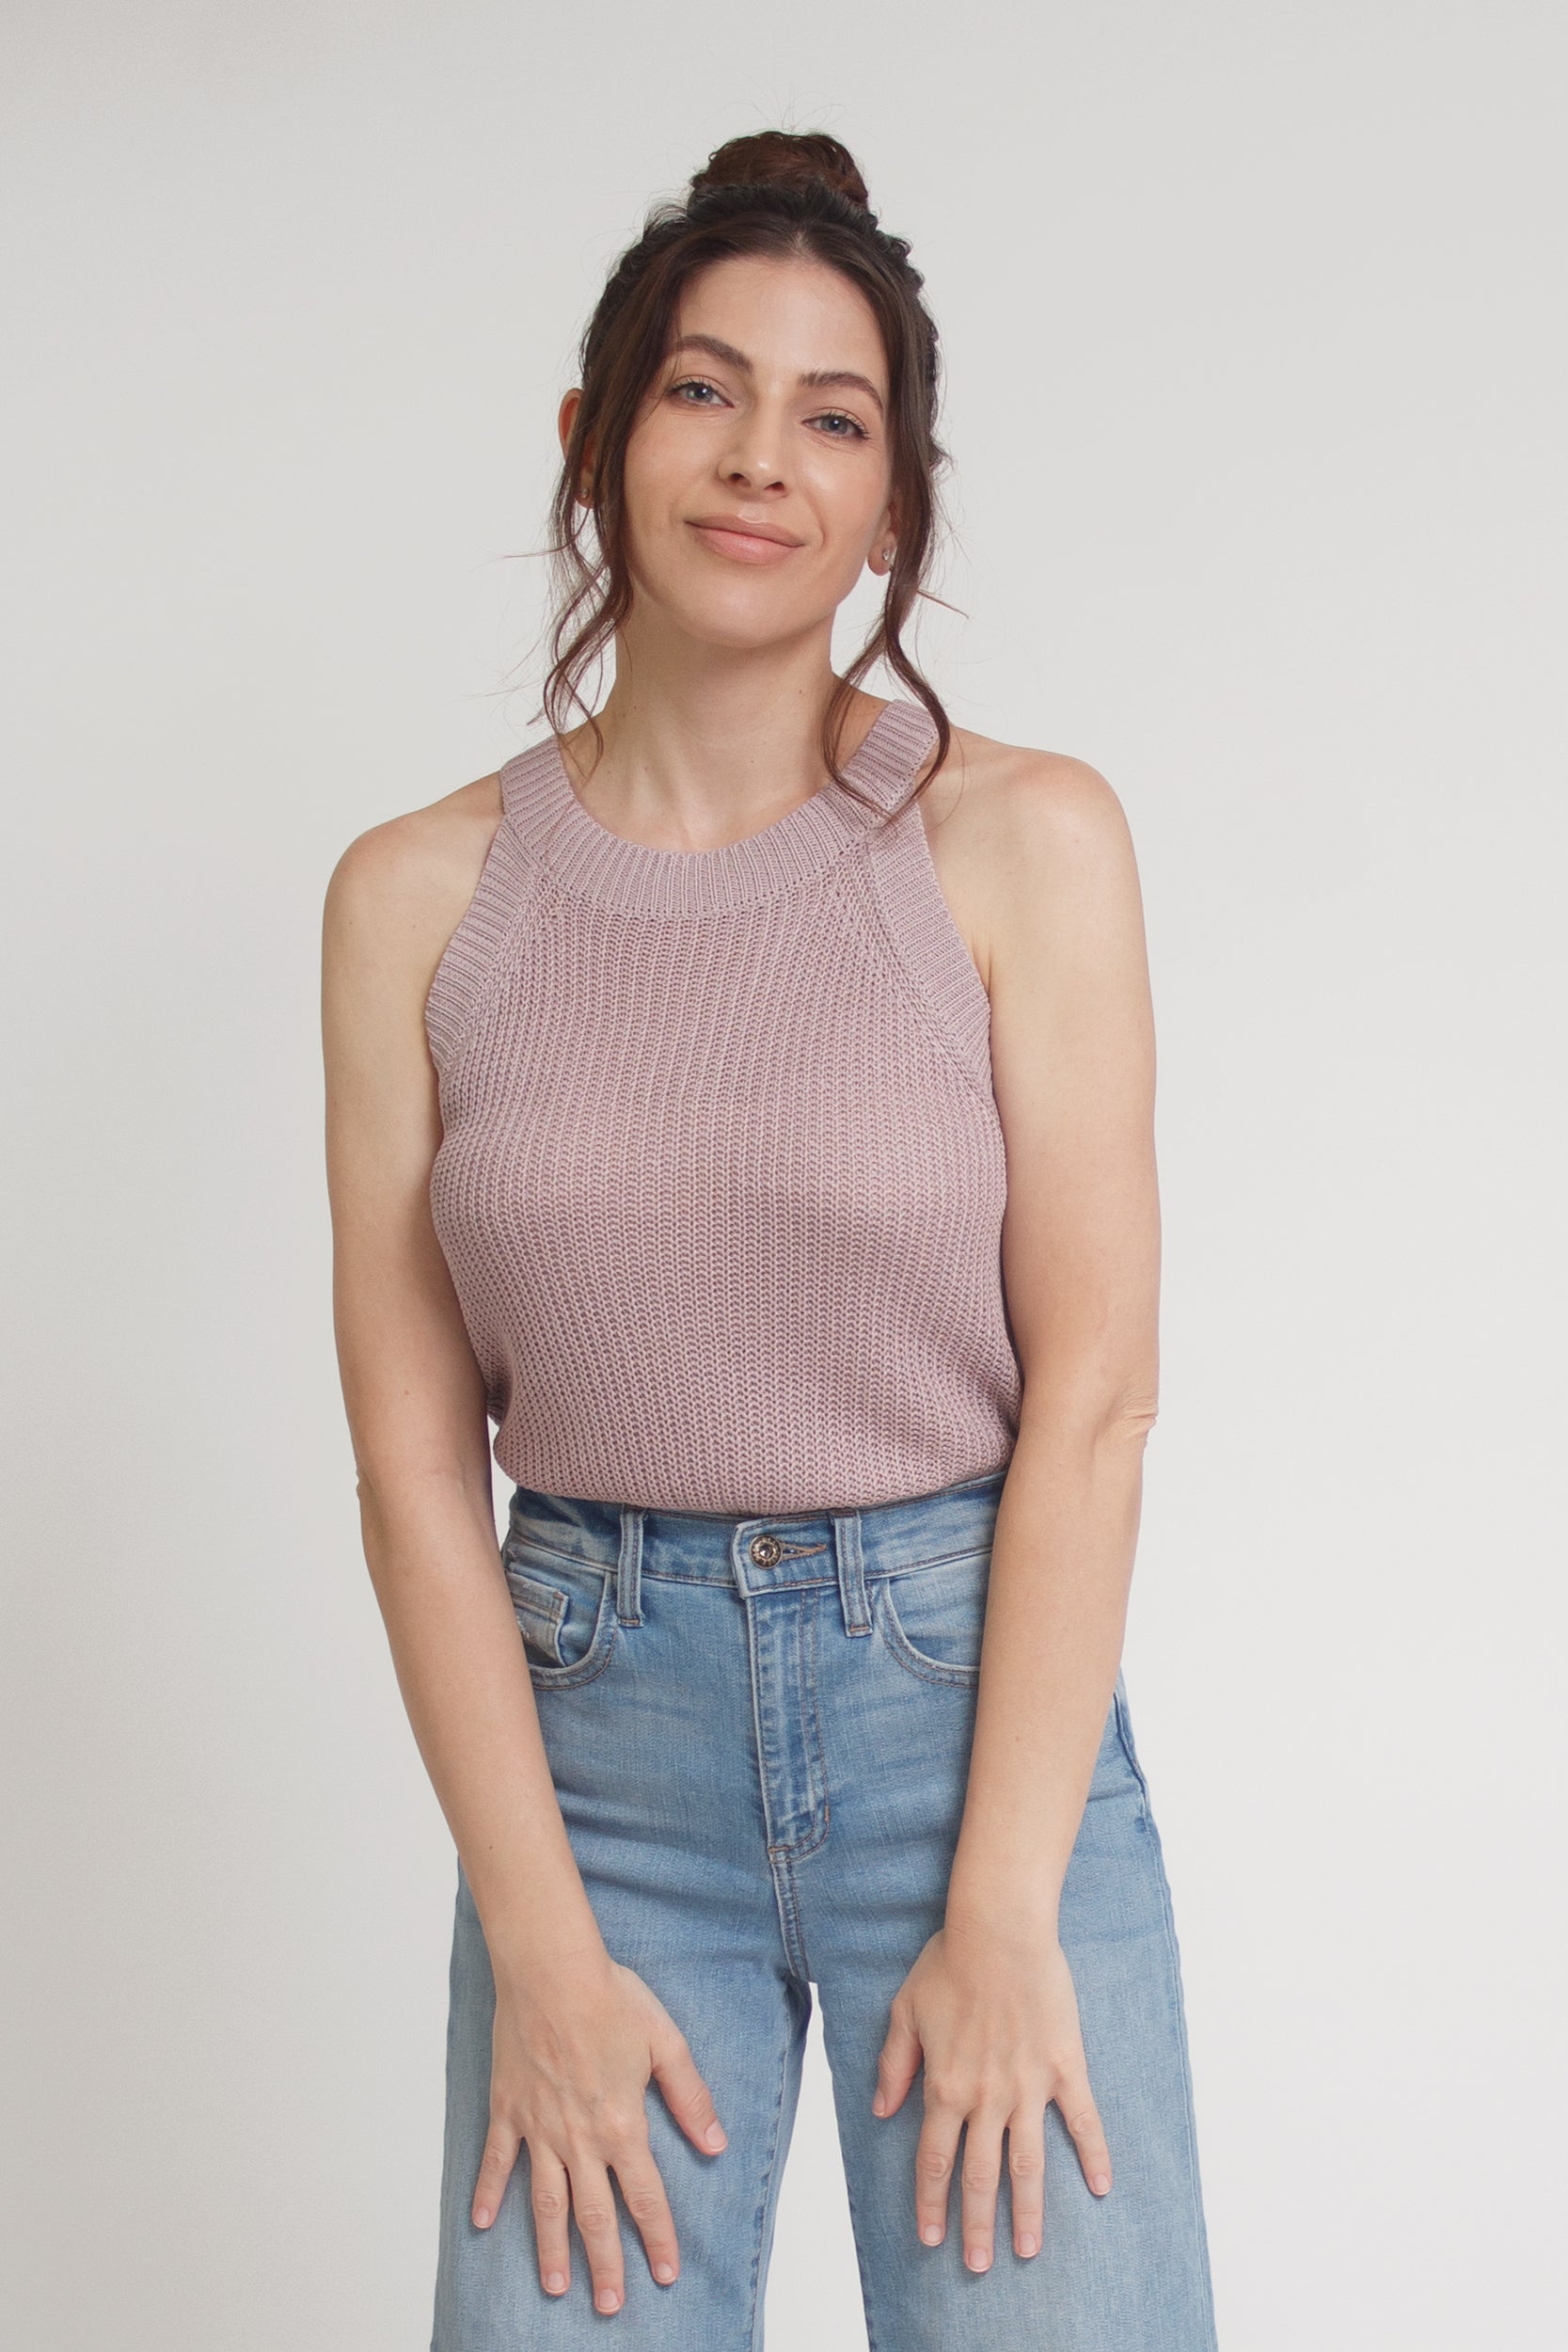 Sweater knit tank top, in mauve. 